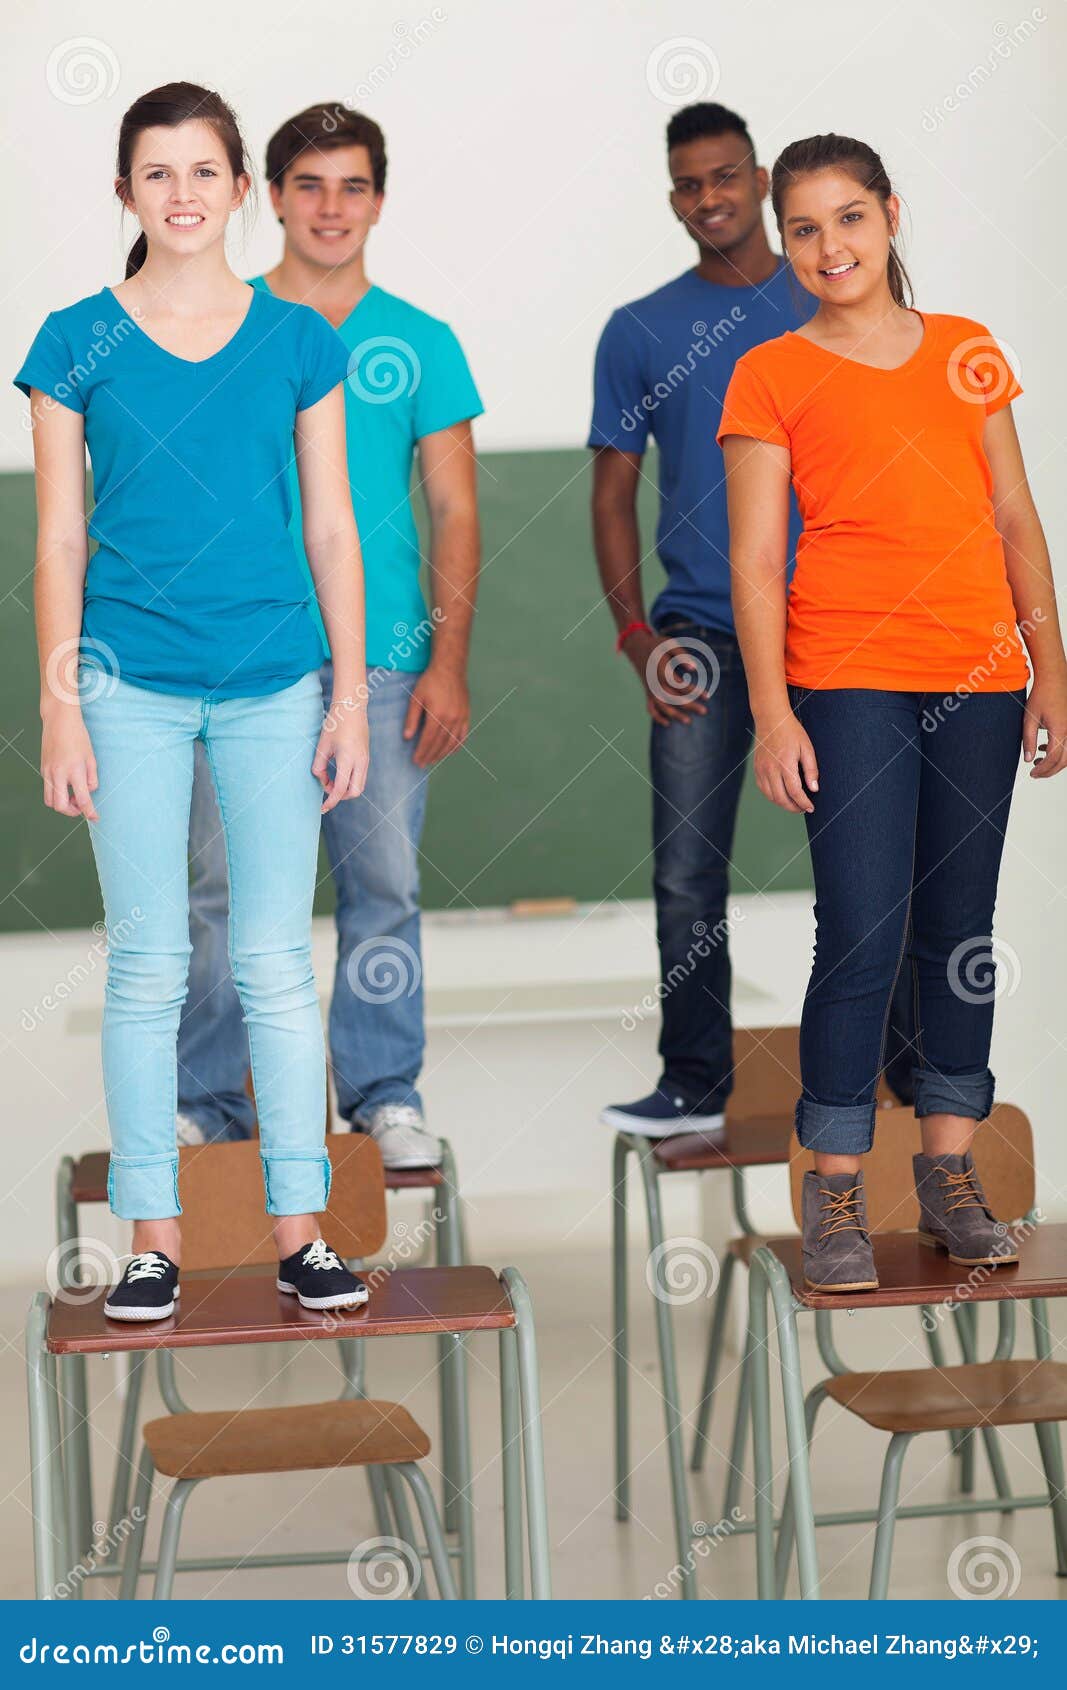 Students Standing Desks Stock Image Image Of Adult Female 31577829